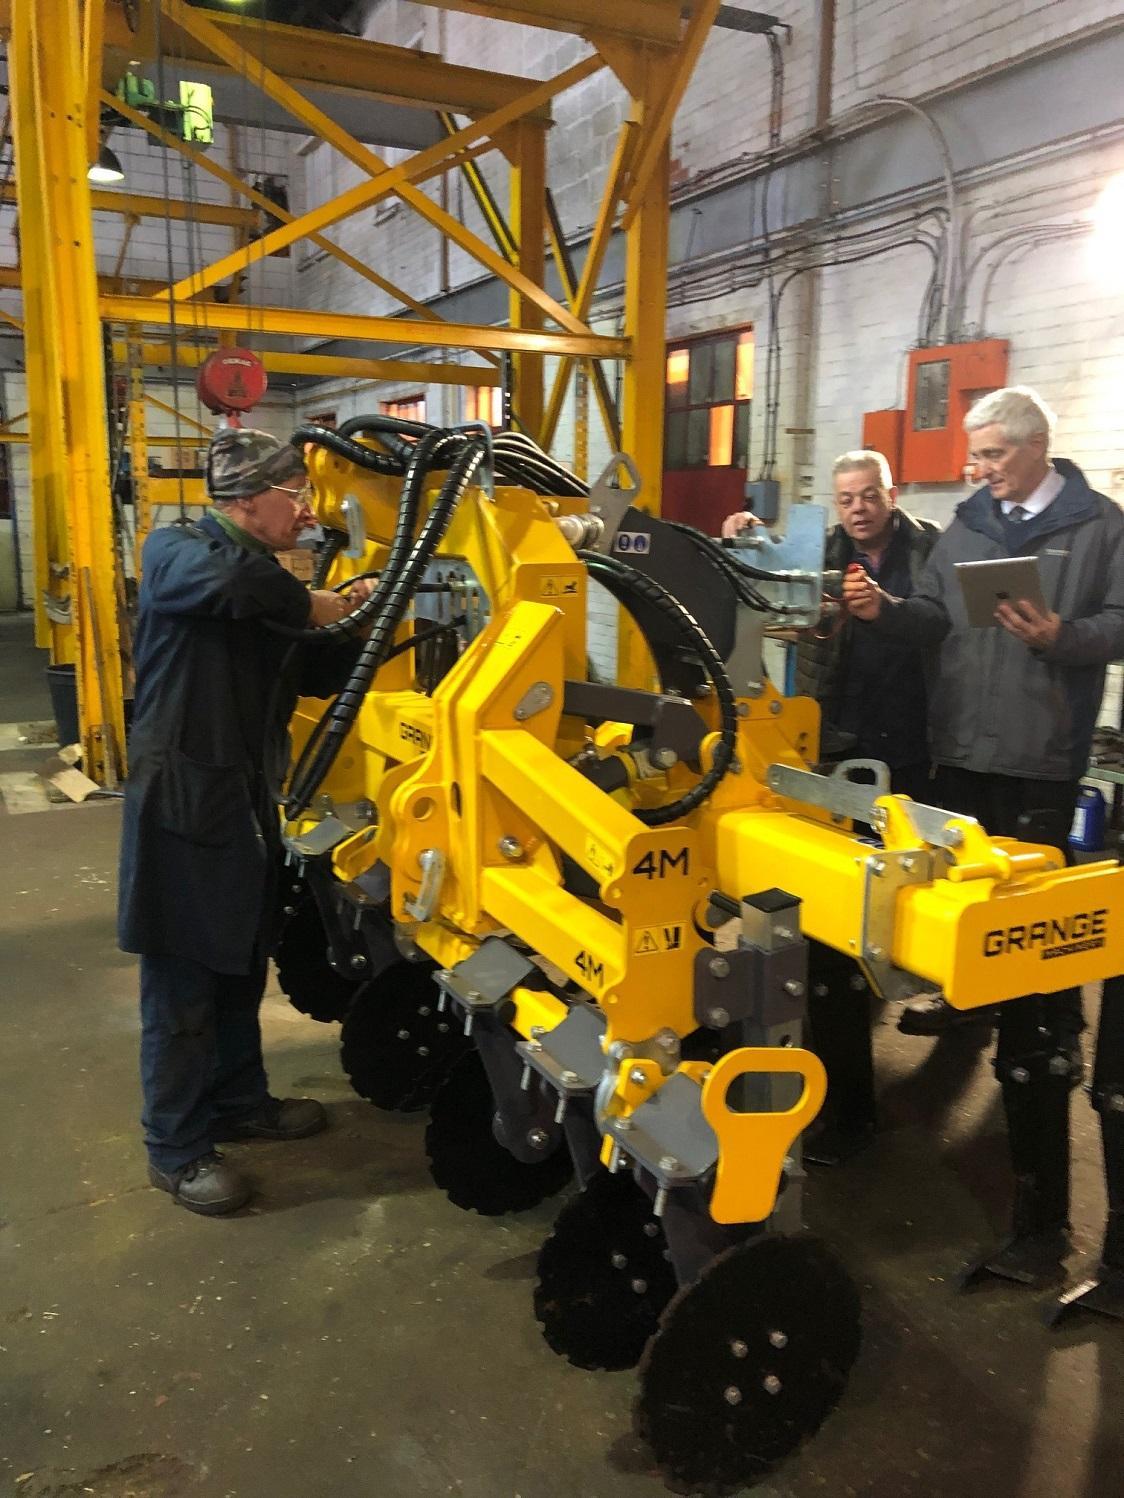 Polydon Industries engineers at work on yellow machinery